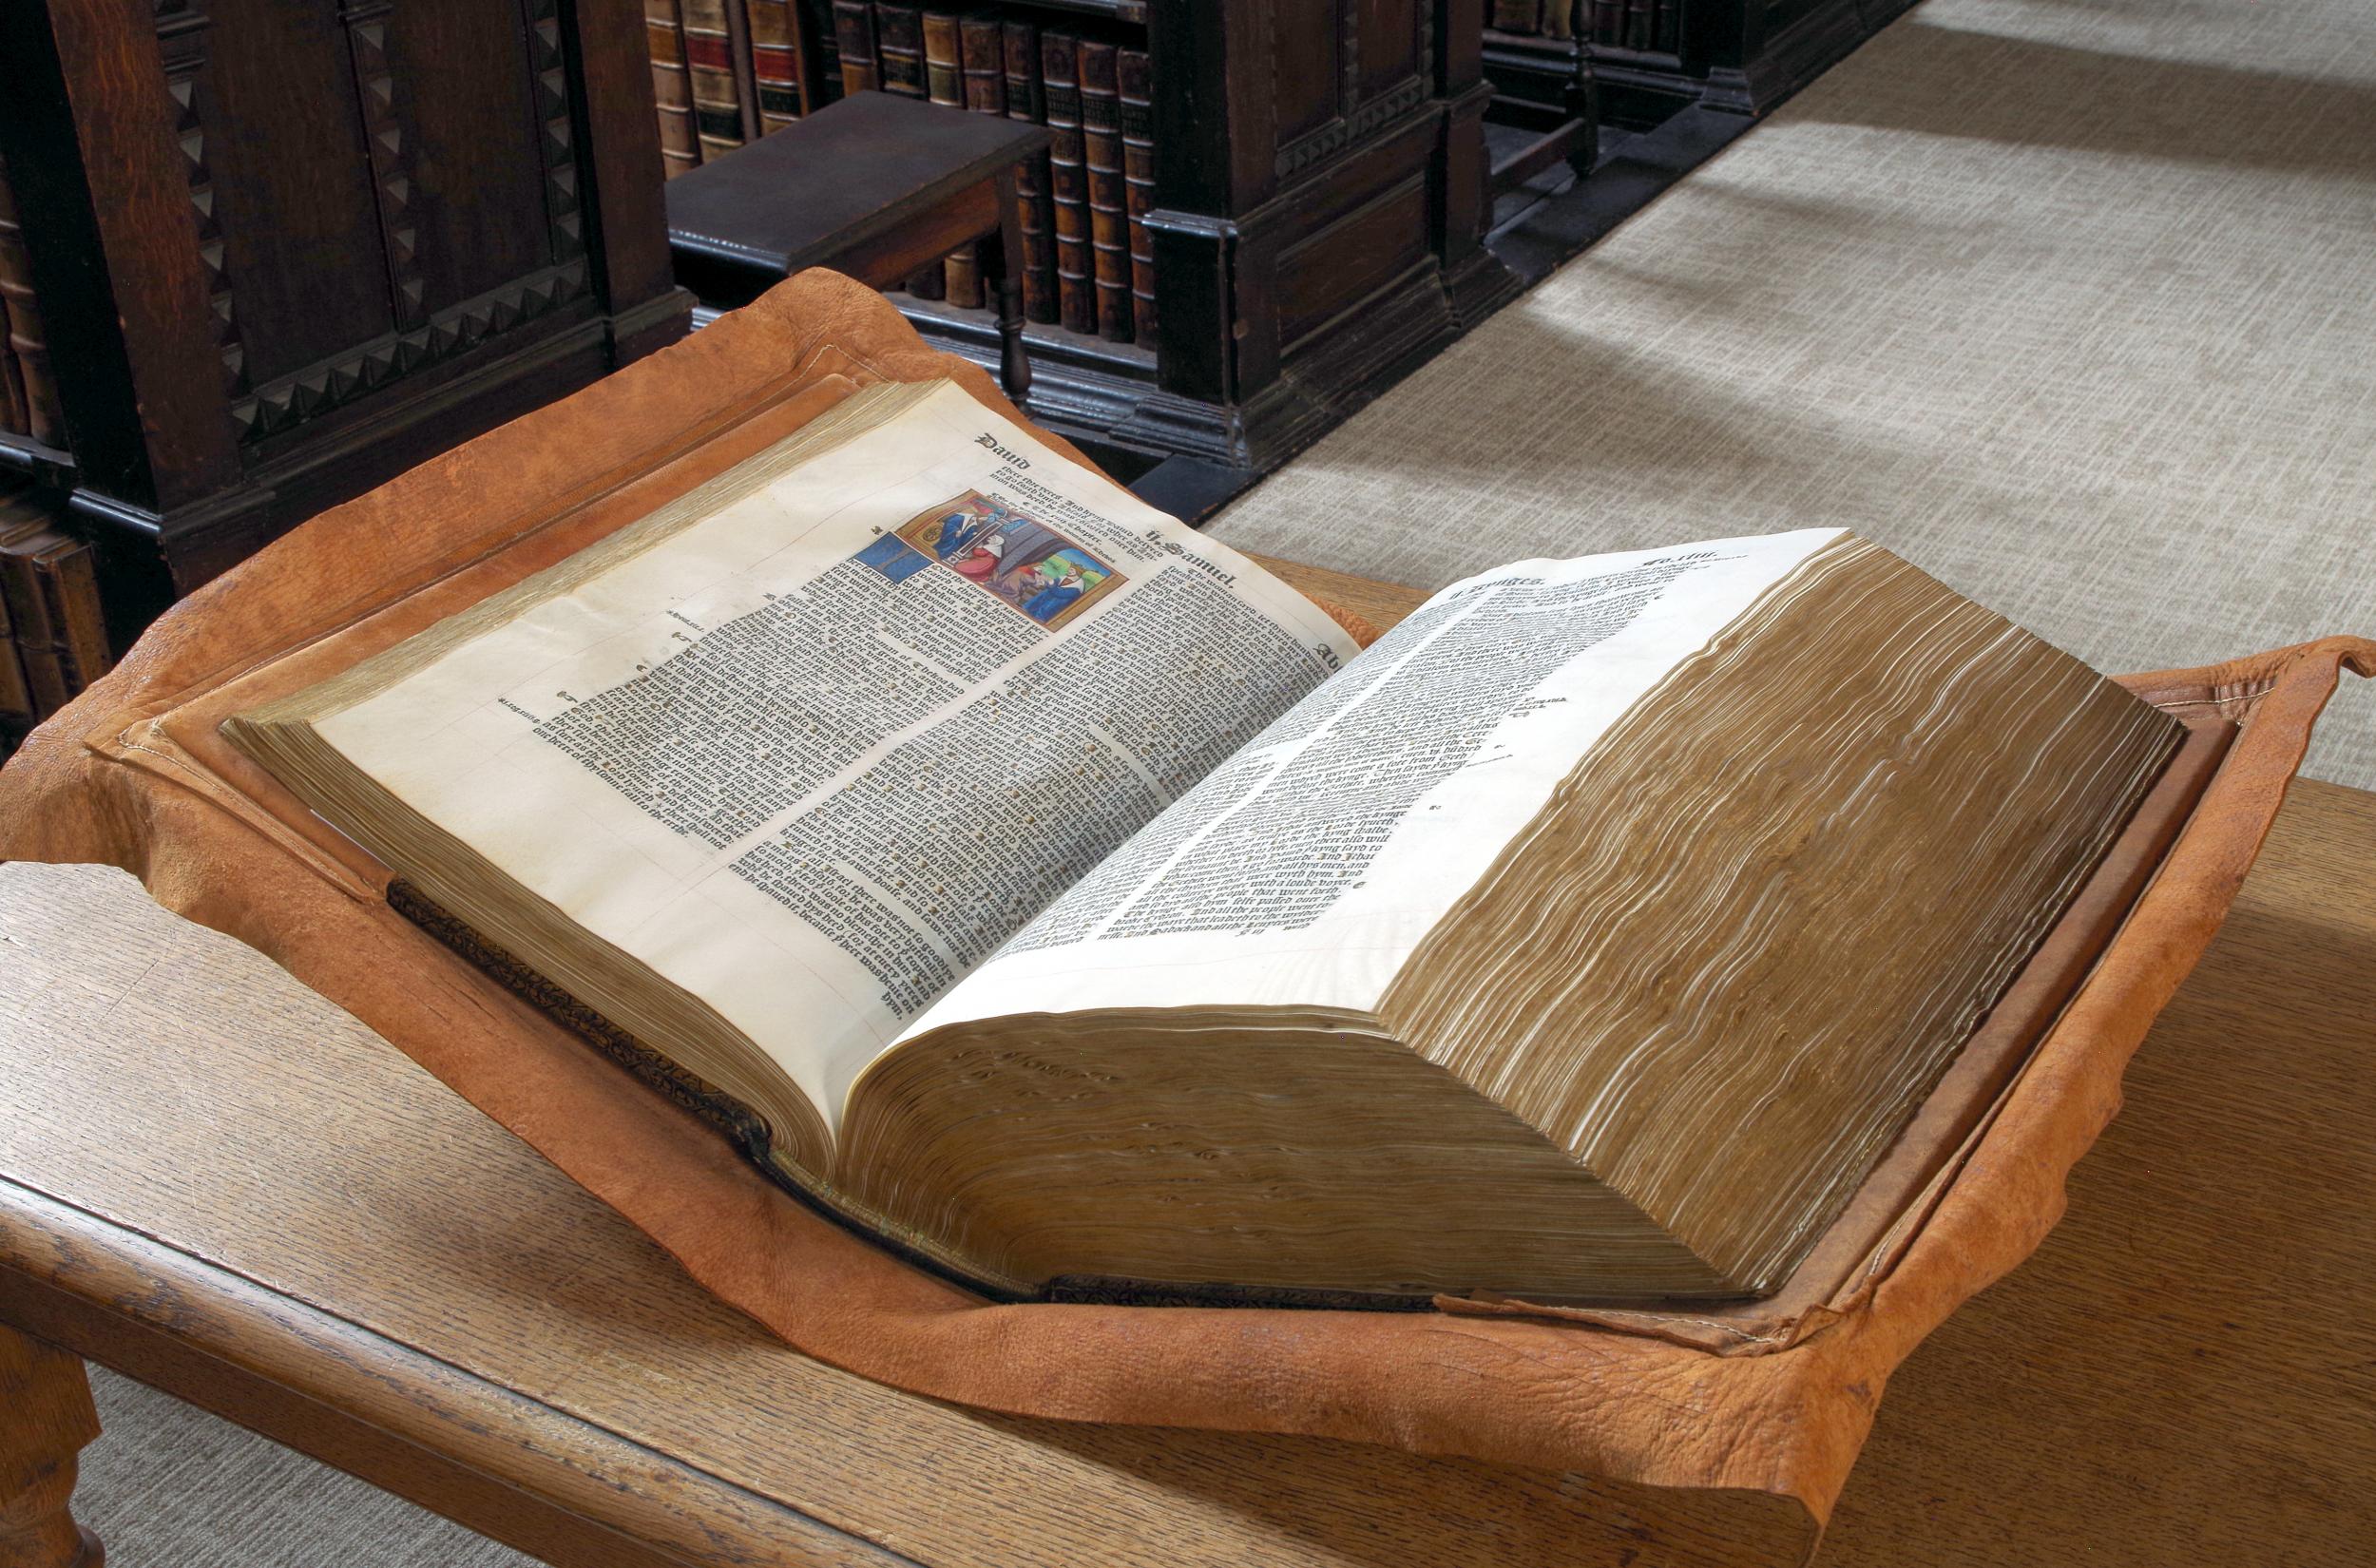 The Great Bible in the Old Library of St John’s College, Cambridge